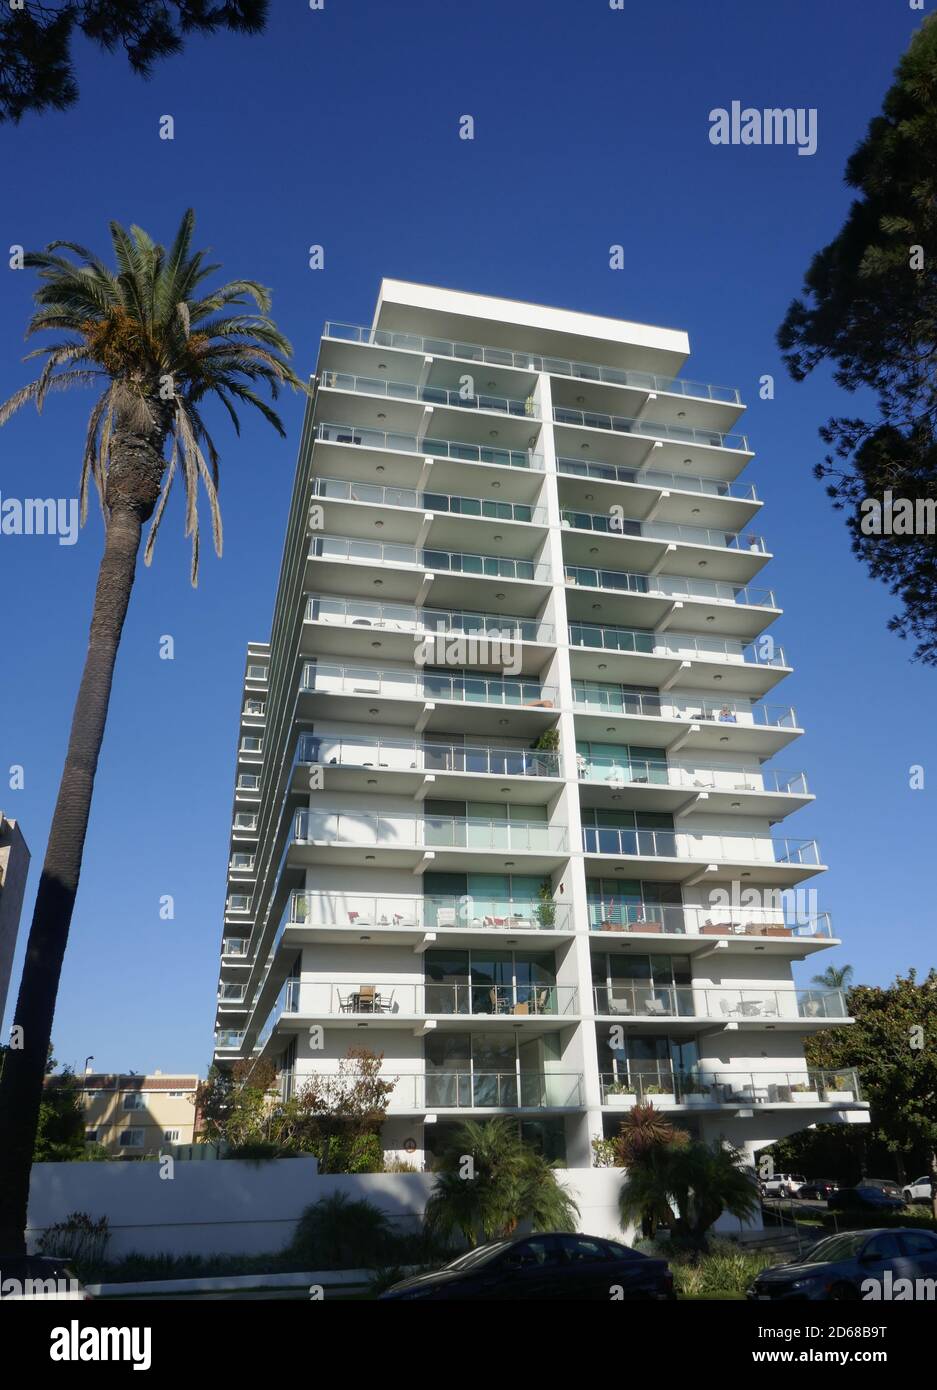 Santa Monica, California, USA 14th October 2020 A General view of atmosphere of Actor William Holden's Former and final home, the building he owned and where he died, at 535 Ocean Avenue in Santa Monica, California, USA. Photo by Barry King/Alamy Stock Photo Stock Photo